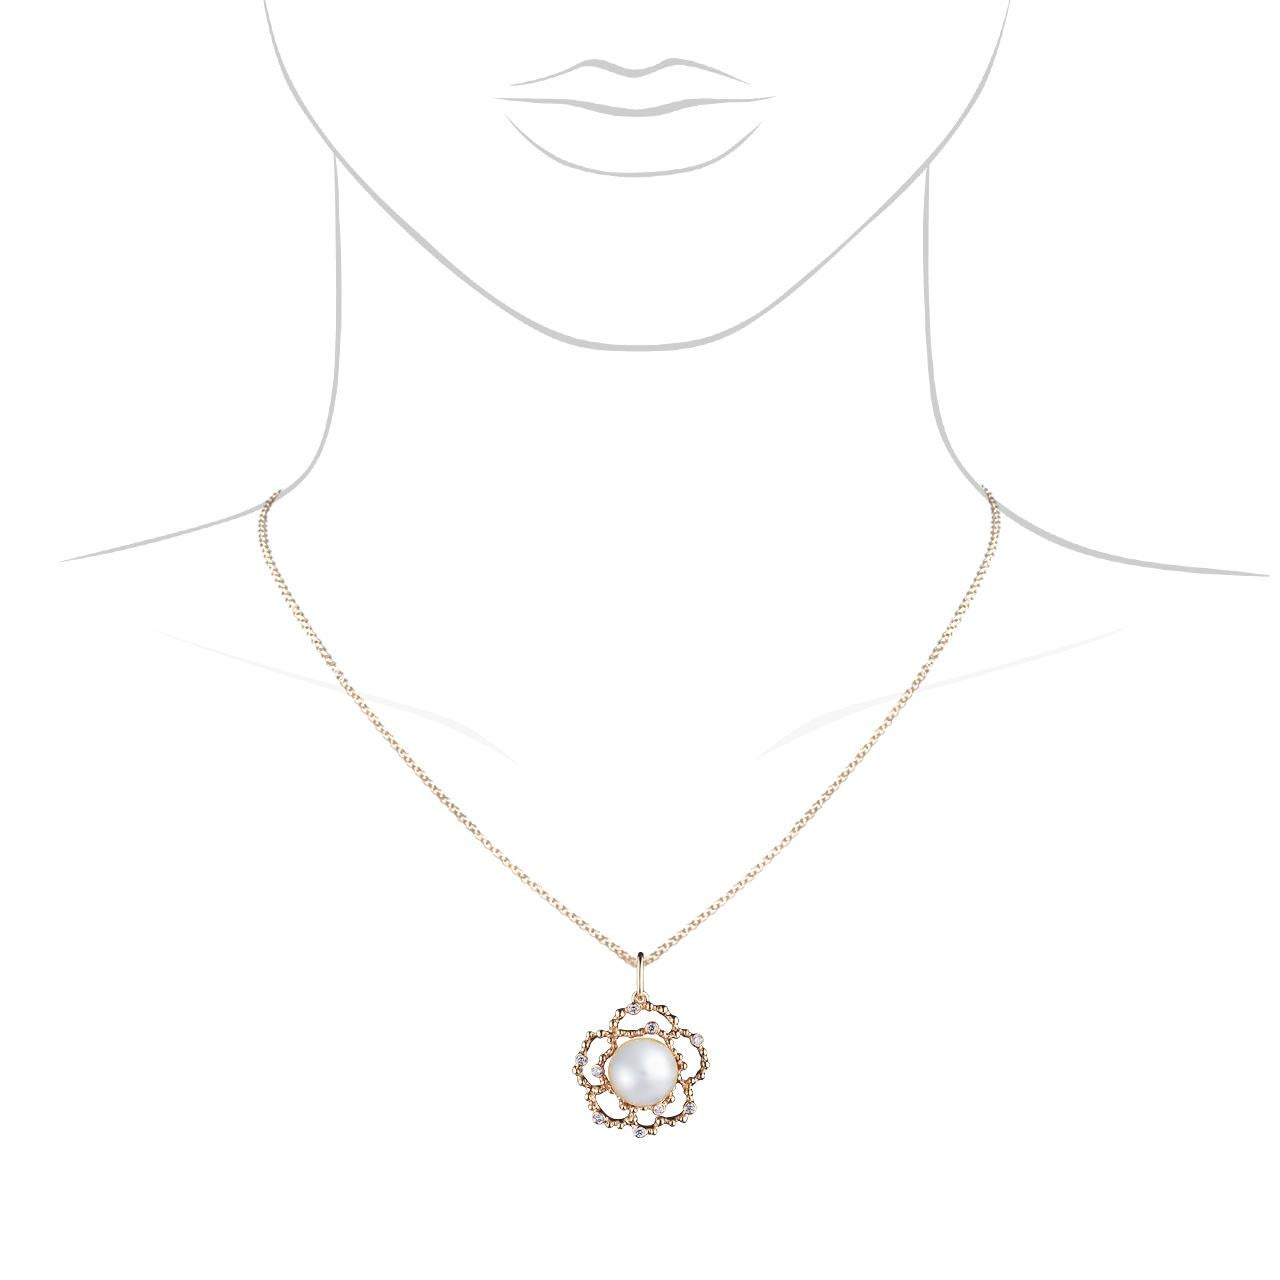 - 9 Round Diamonds - 0.11 ct, E-F/VS
- 8.5-9 mm White South Sea pearl
- 18K Yellow Gold 
- Weight: 4.34 g
This elegant pendant from the Byzantium collection features a lustrous White South Sea pearl of 8,5-9 mm diameter. The design is complete with